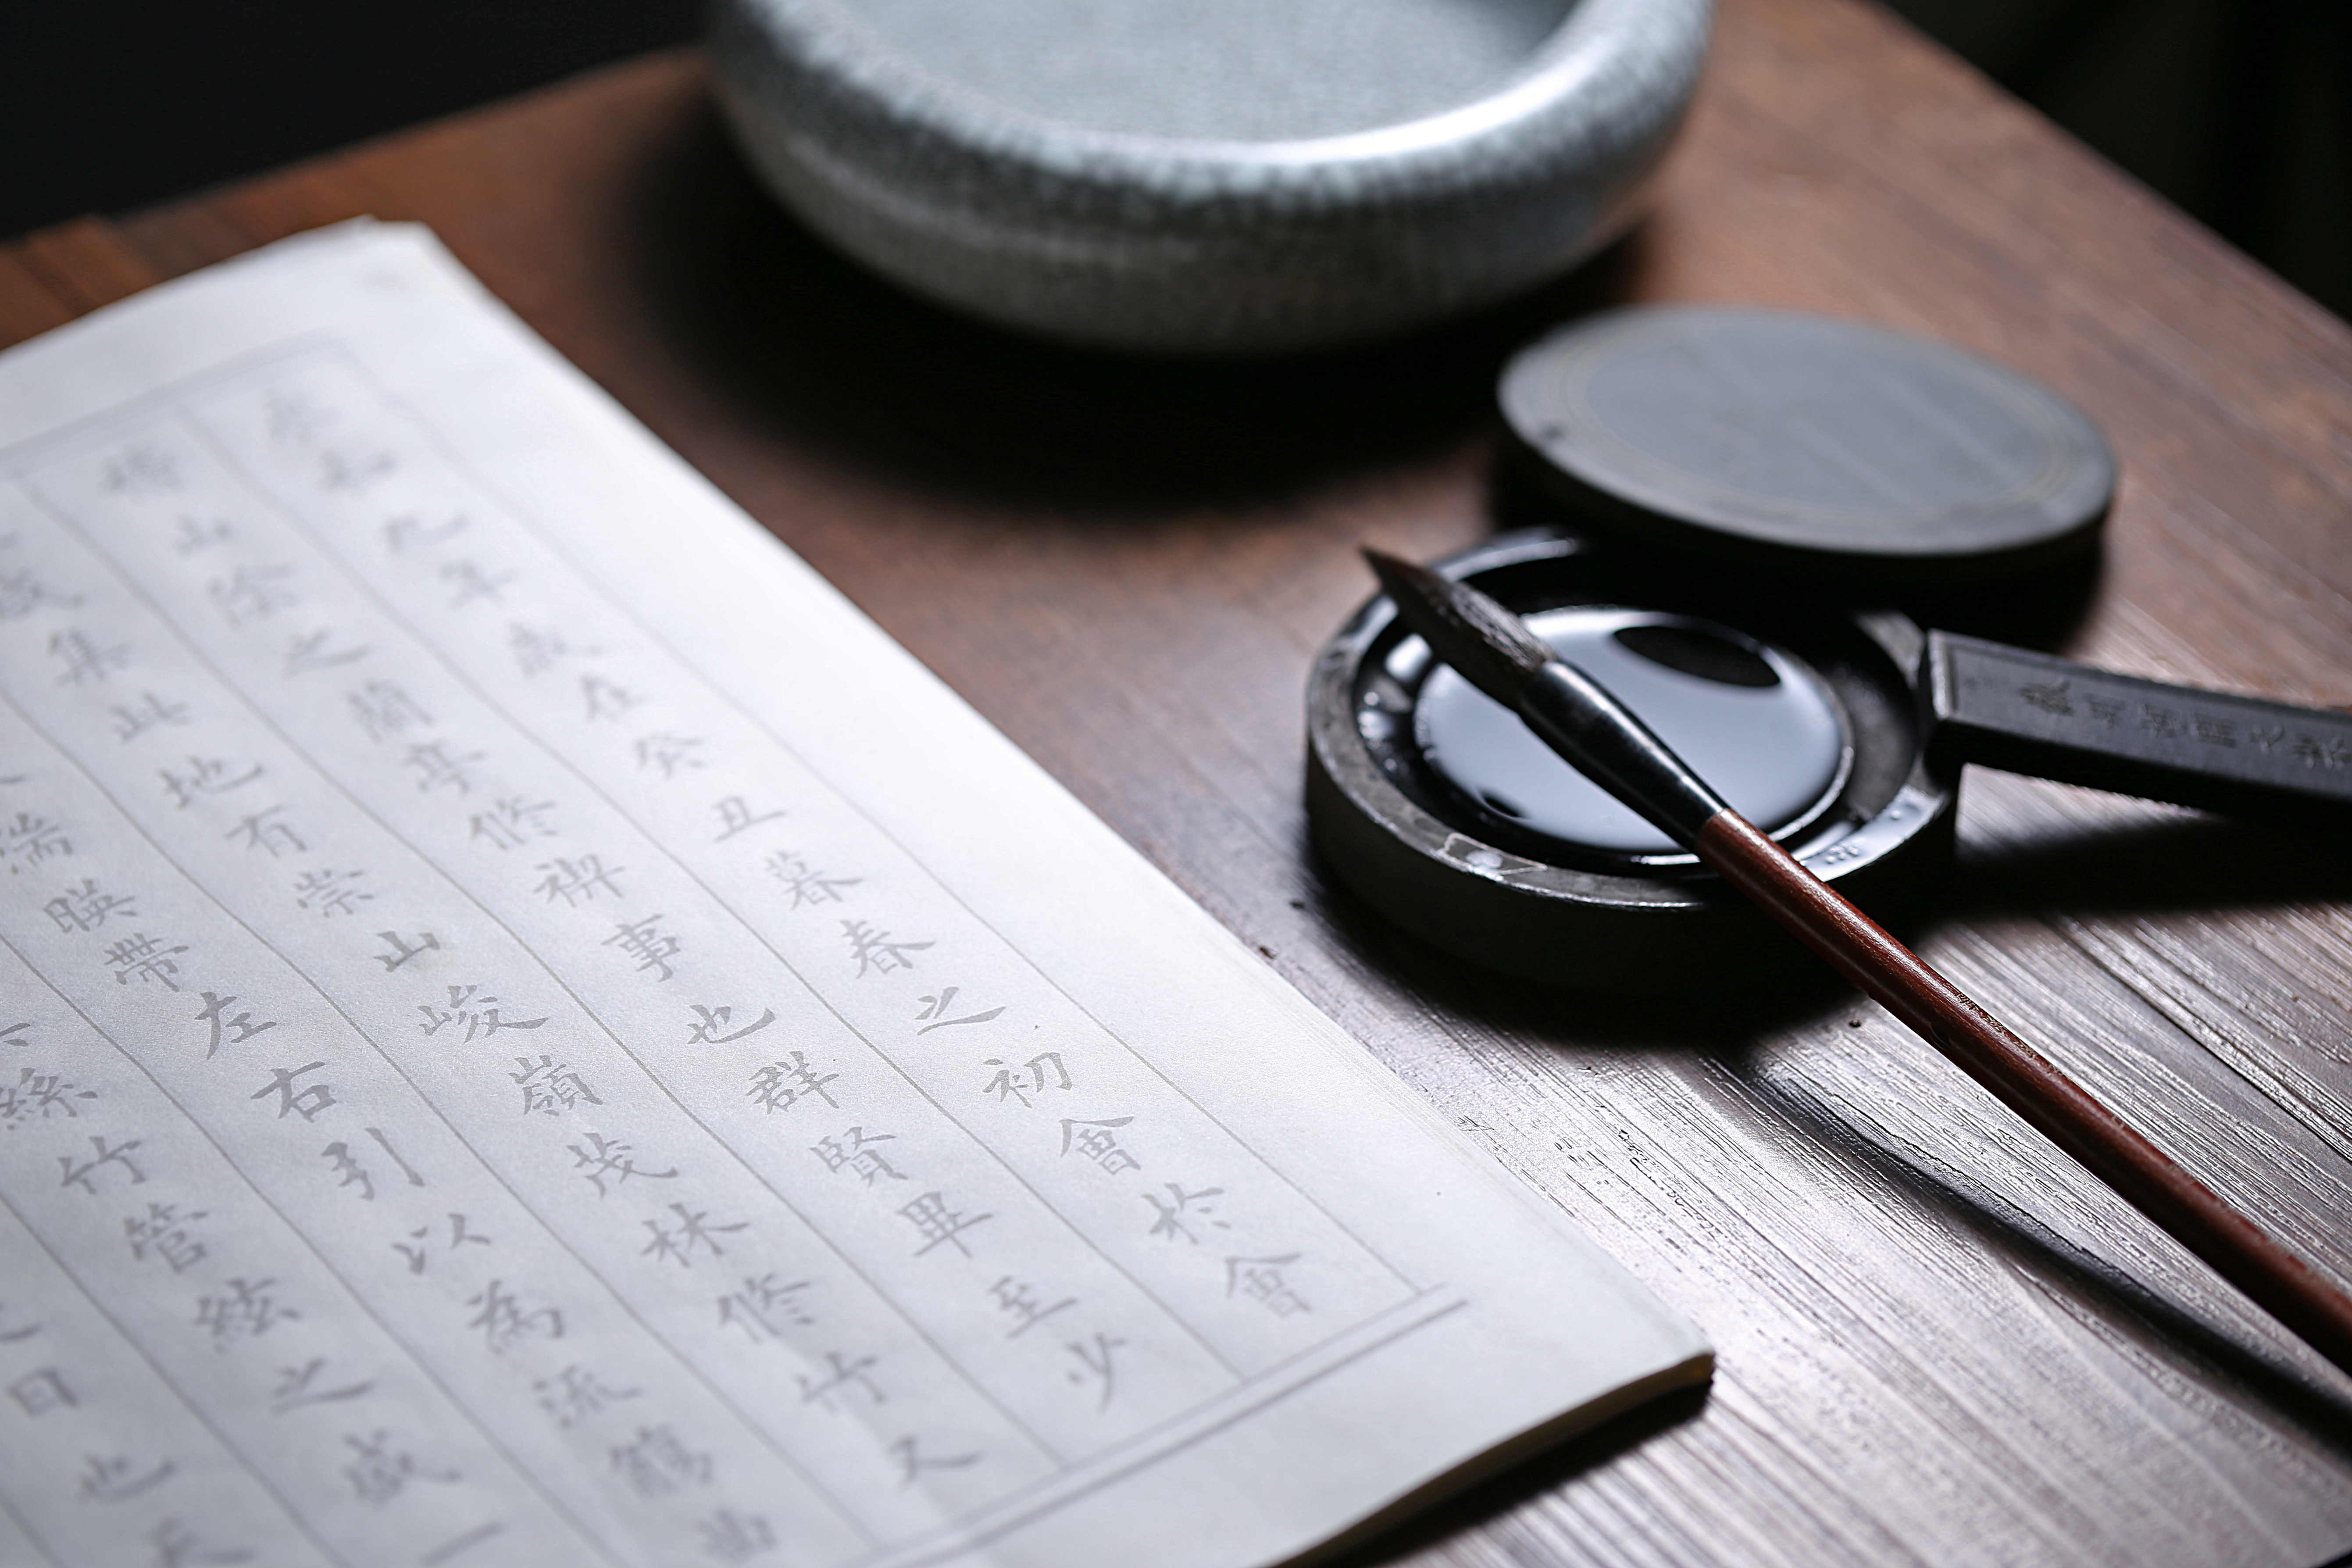 How To Memorize Chinese Characters: 5 Fast and Effective Methods